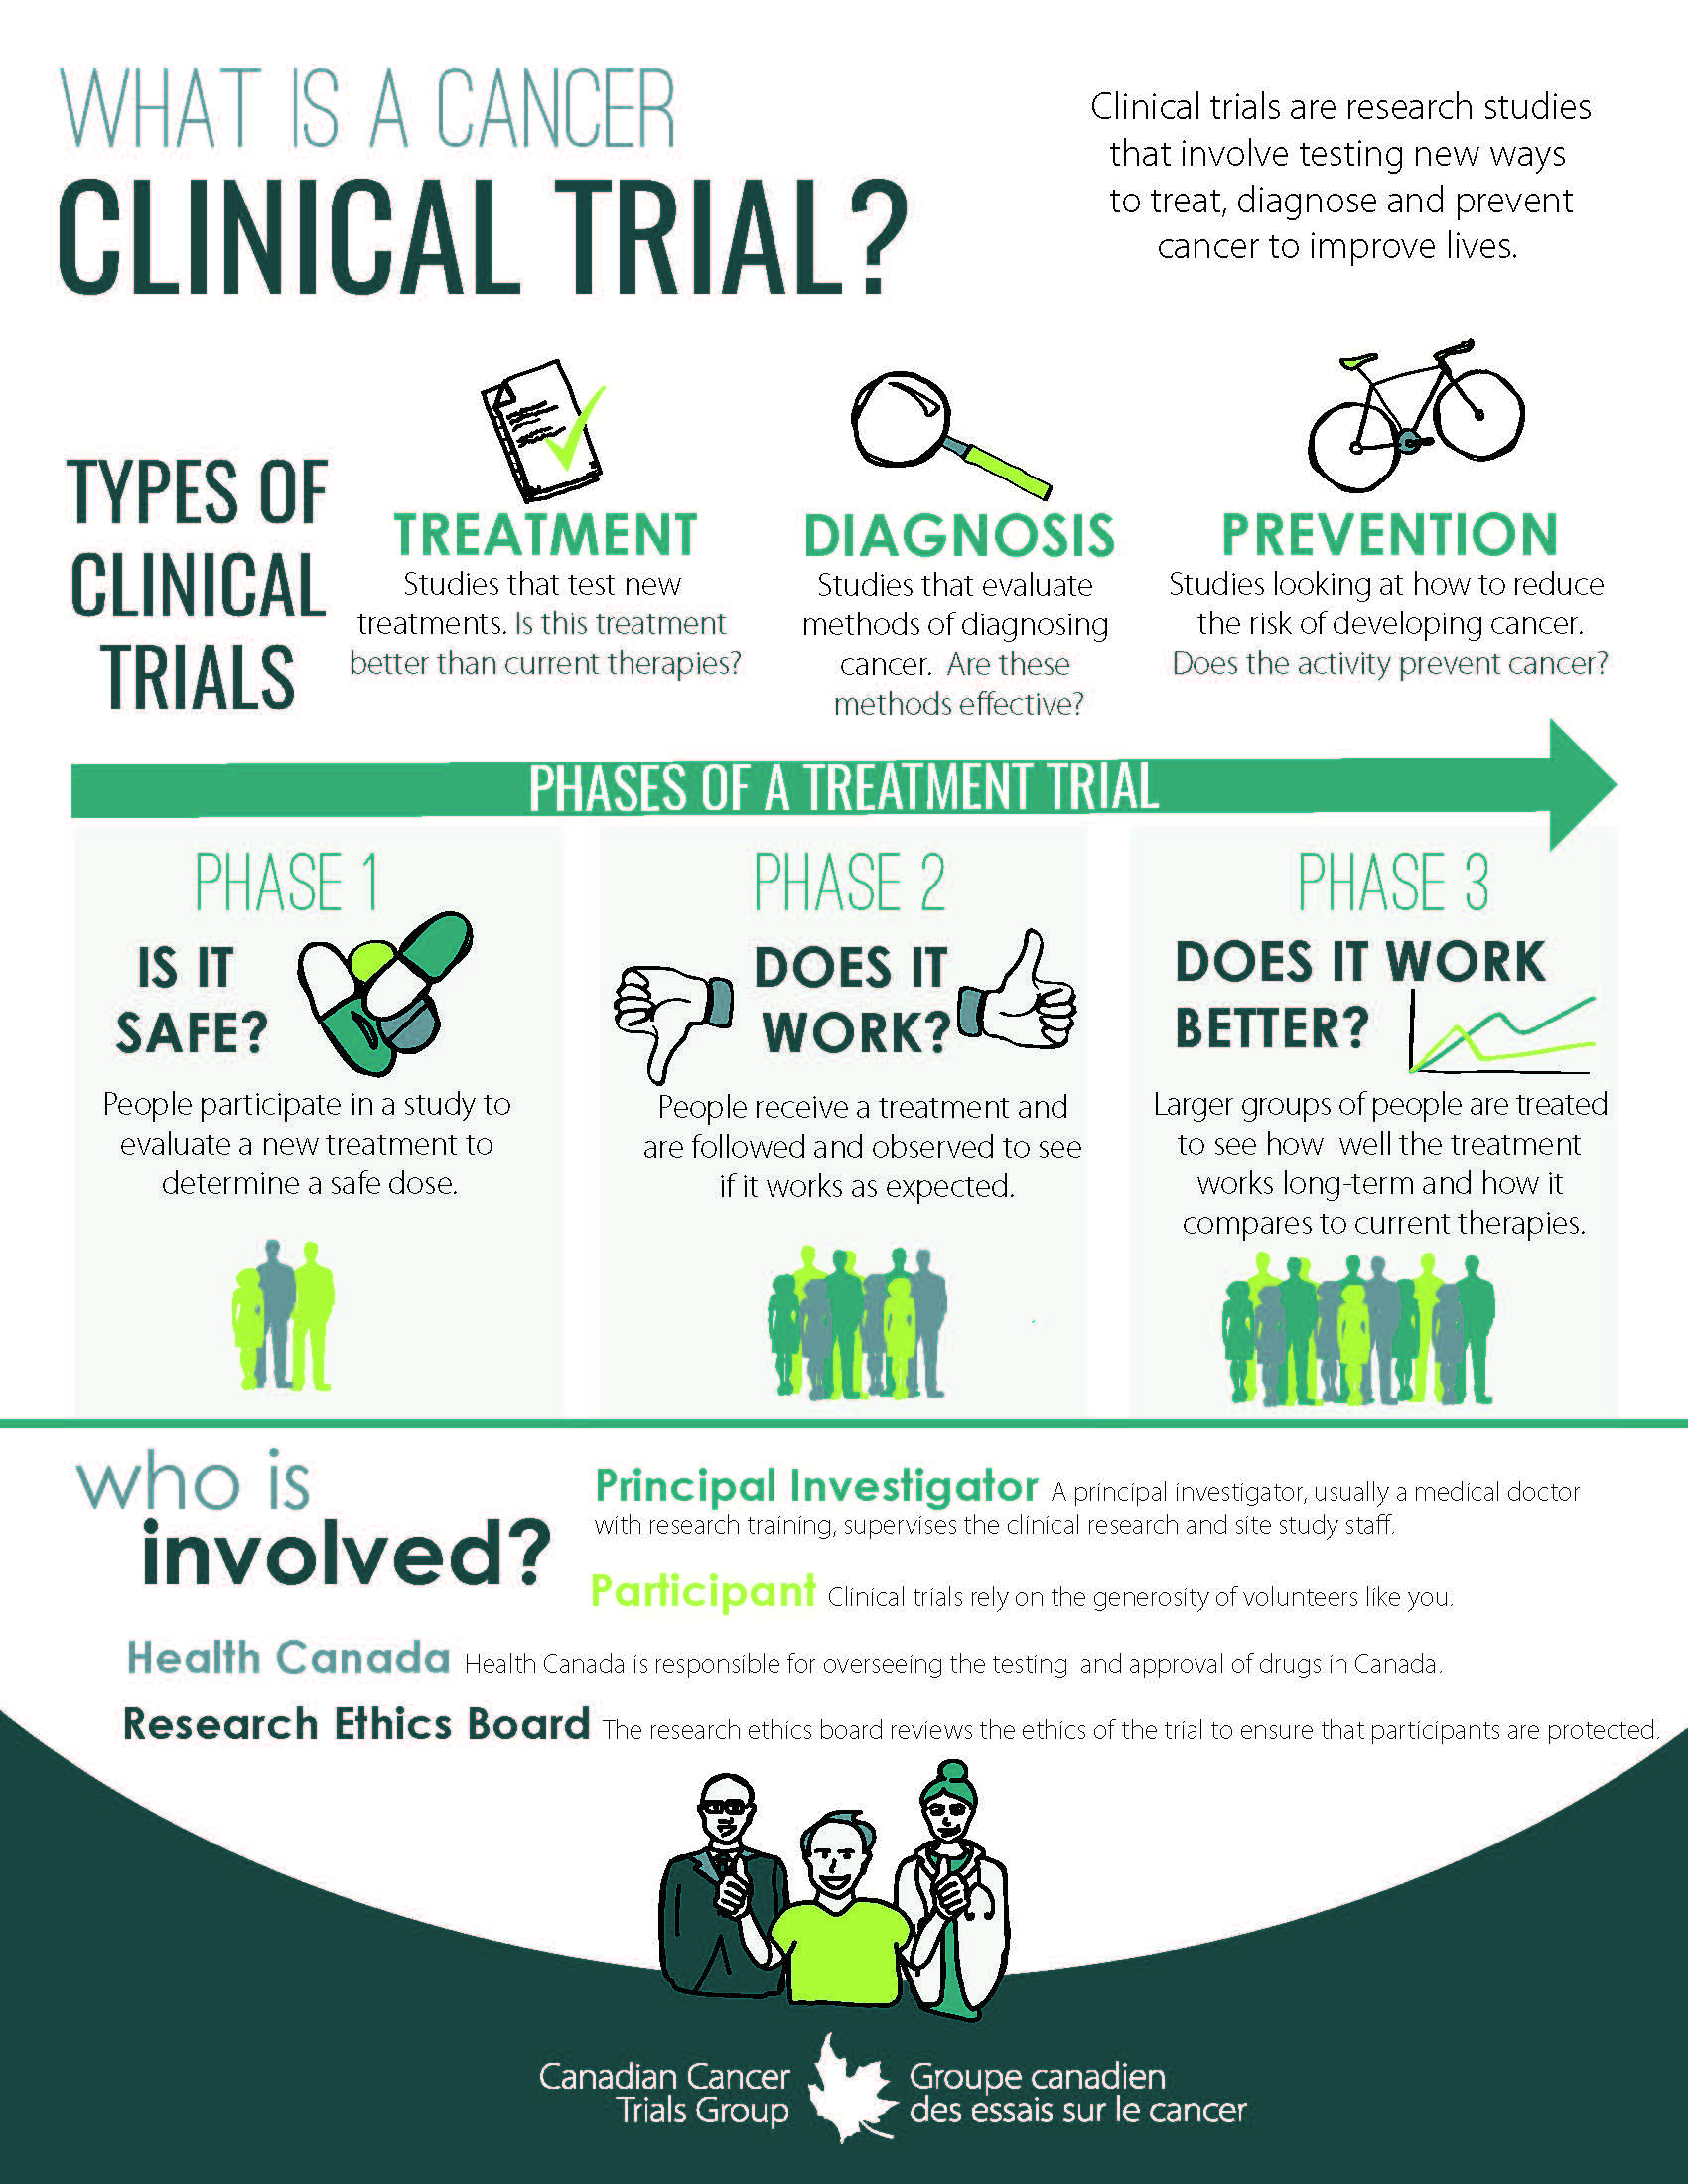 What is a cancer clinical trial